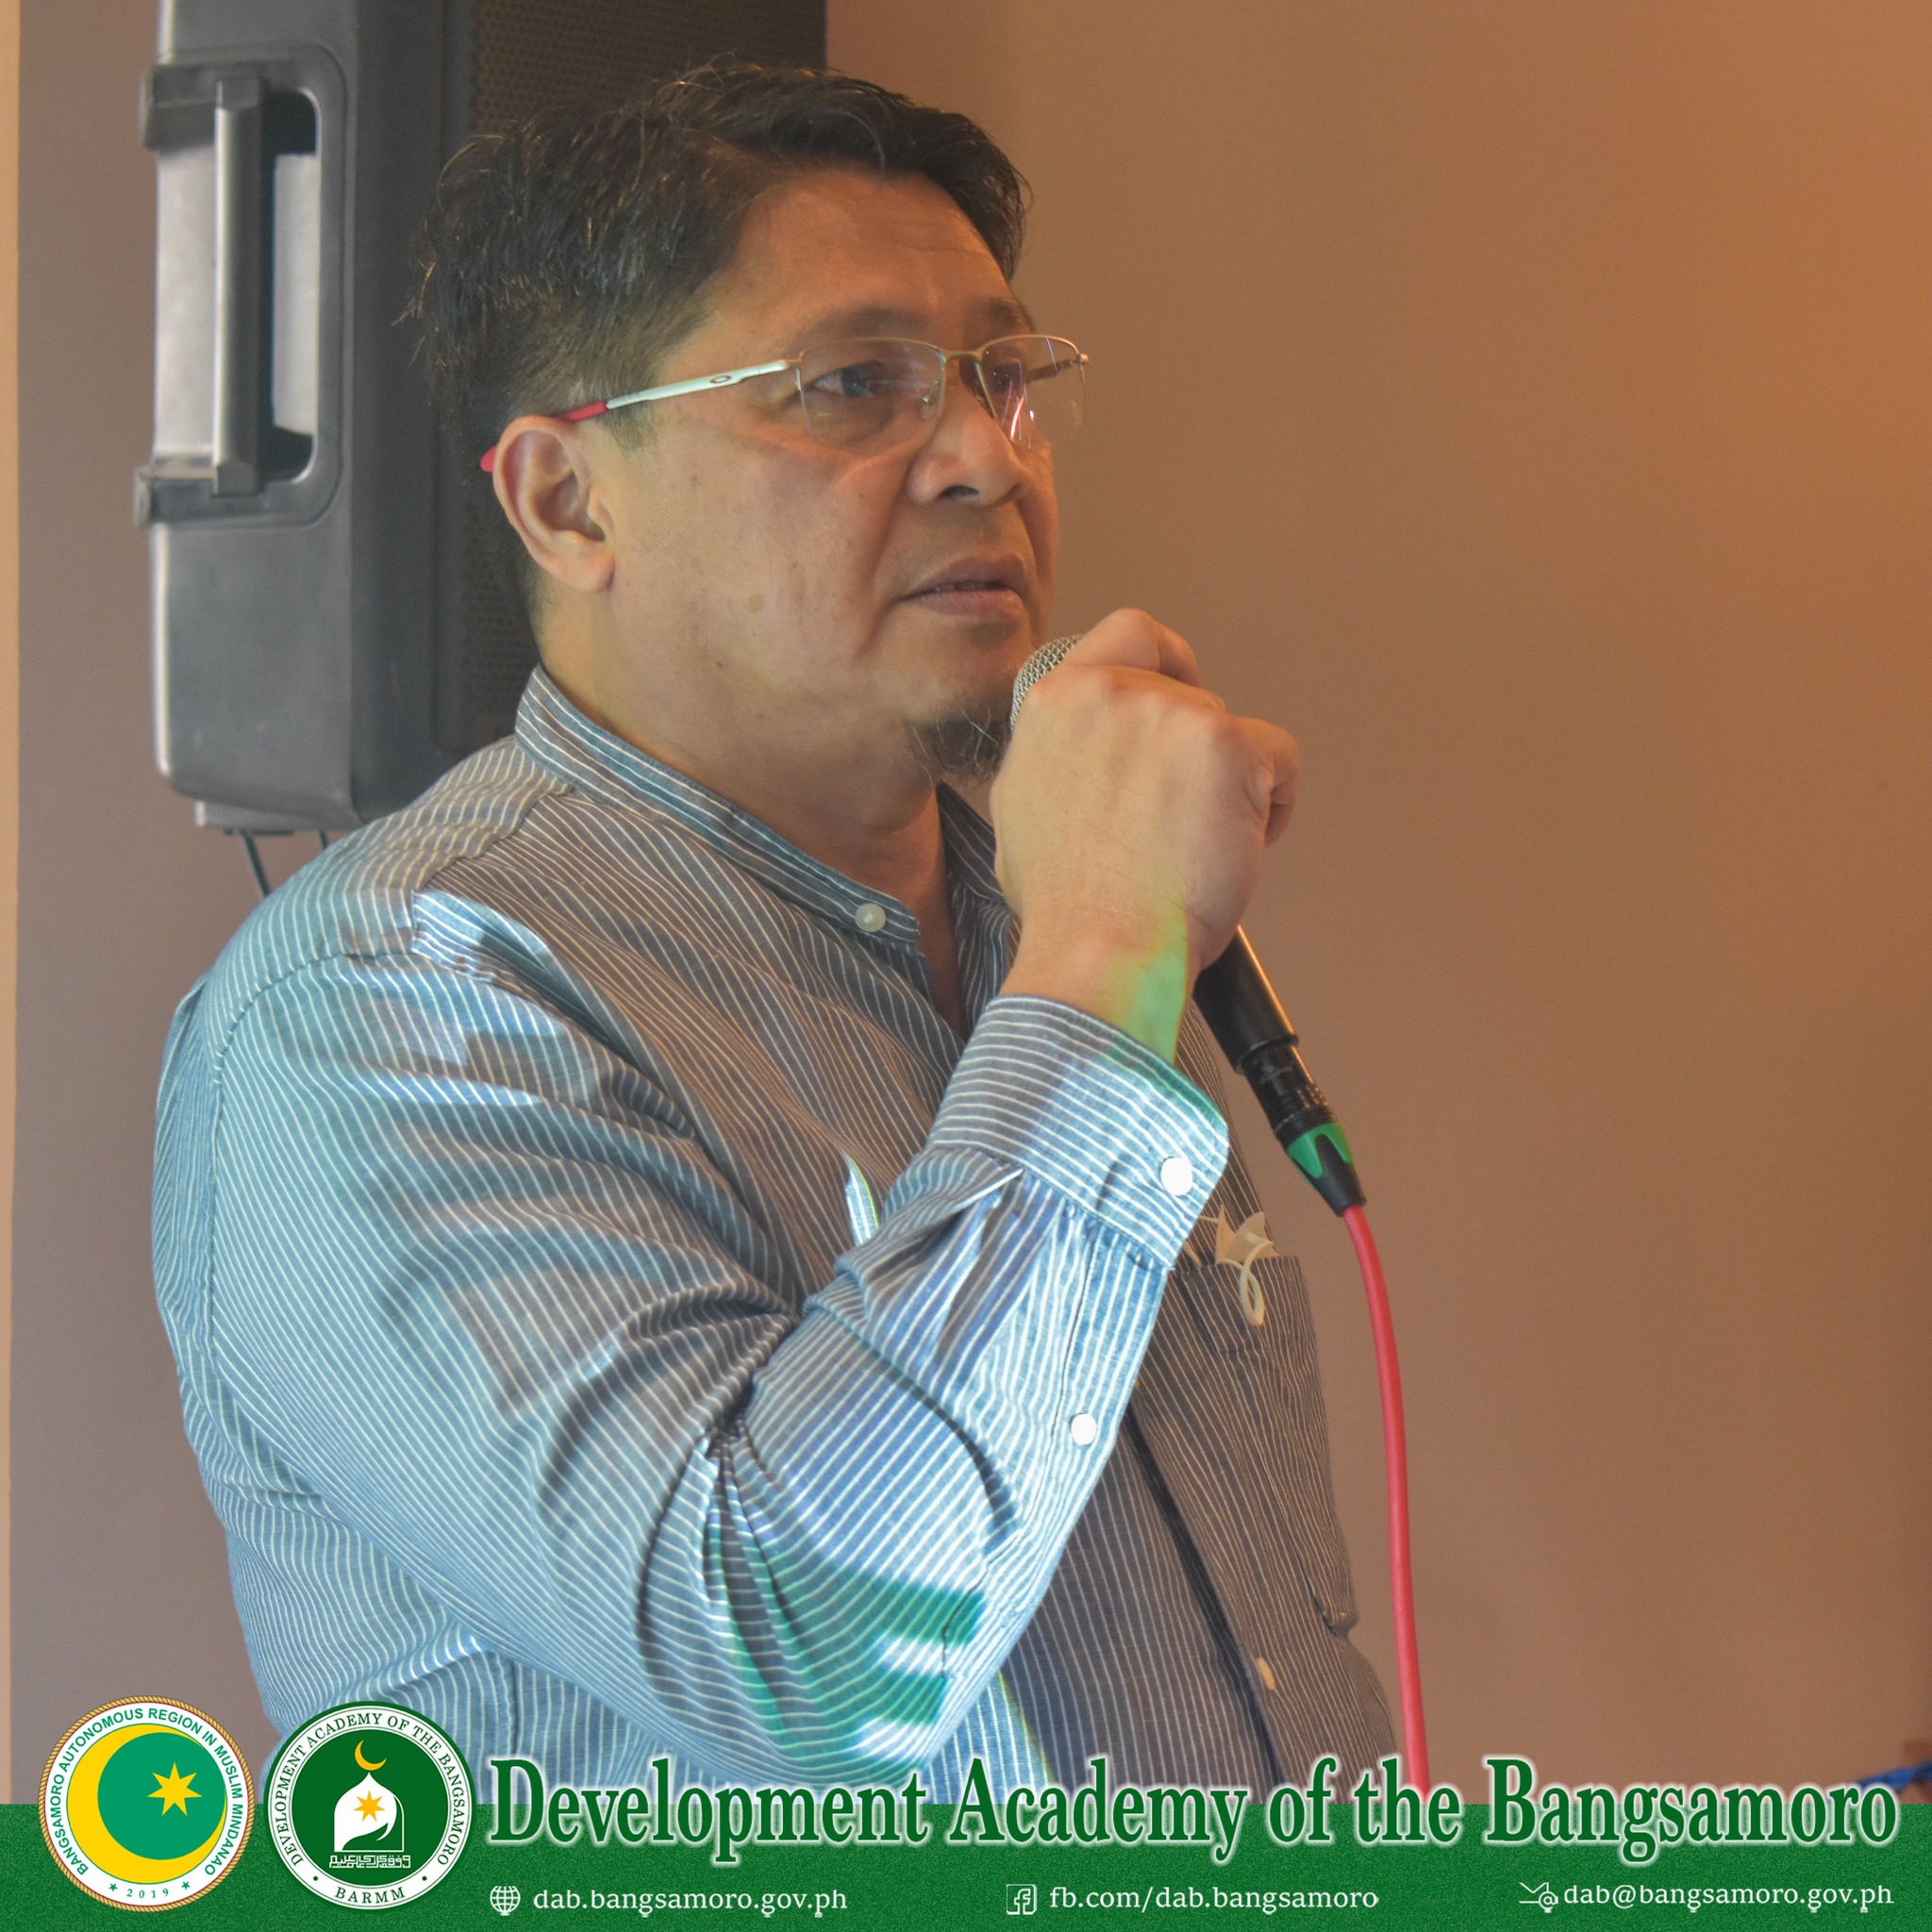 You are currently viewing The Office of the Wali of Bangsamoro, in collaboration with the Development Academy of the Bangsamoro, conducted successfully a Training on Completed Staff Work on December 12-14, 2023 at the London Beach Resort in General Santos City. The three-day